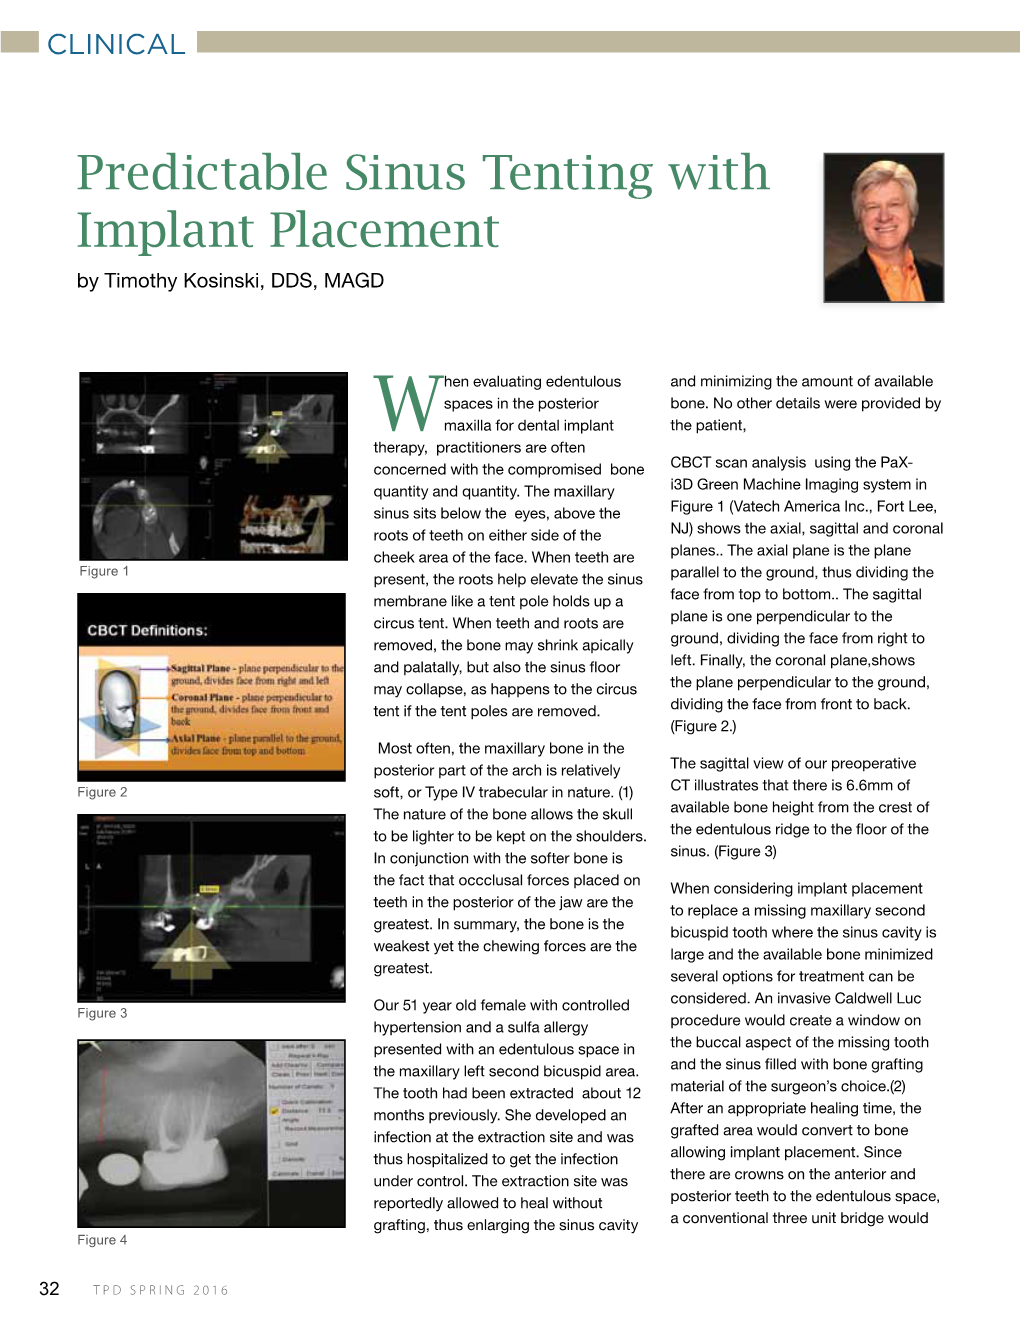 Predictable Sinus Tenting with Implant Placement by Timothy Kosinski, DDS, MAGD